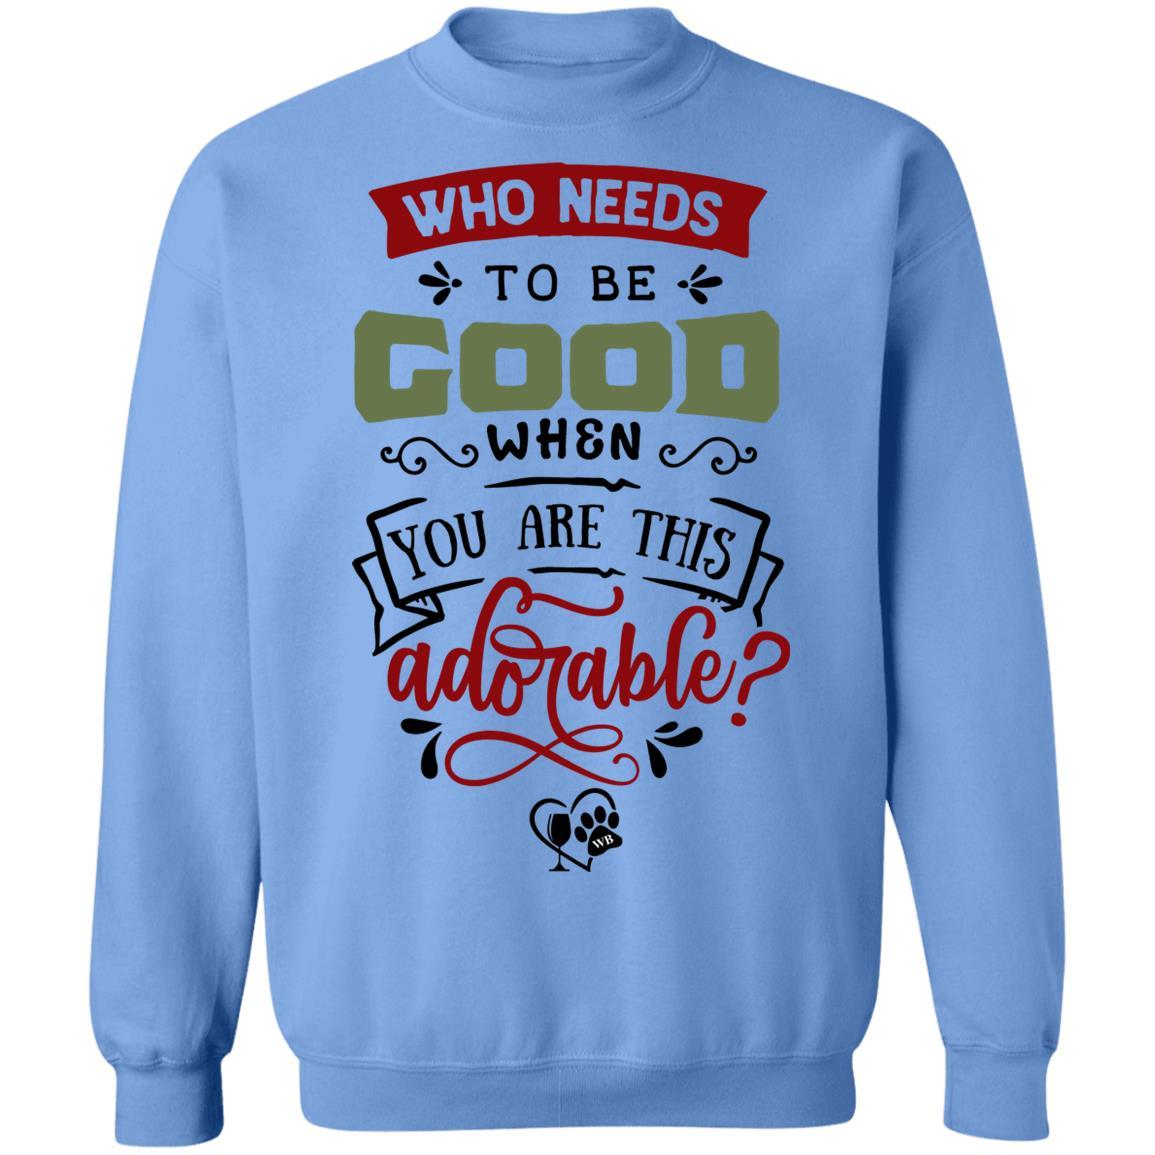 Sweatshirts Carolina Blue / S WineyBitches.Co "Who Needs To Be Good When You Are This Adorable" Crewneck Pullover Sweatshirt  8 oz. WineyBitchesCo